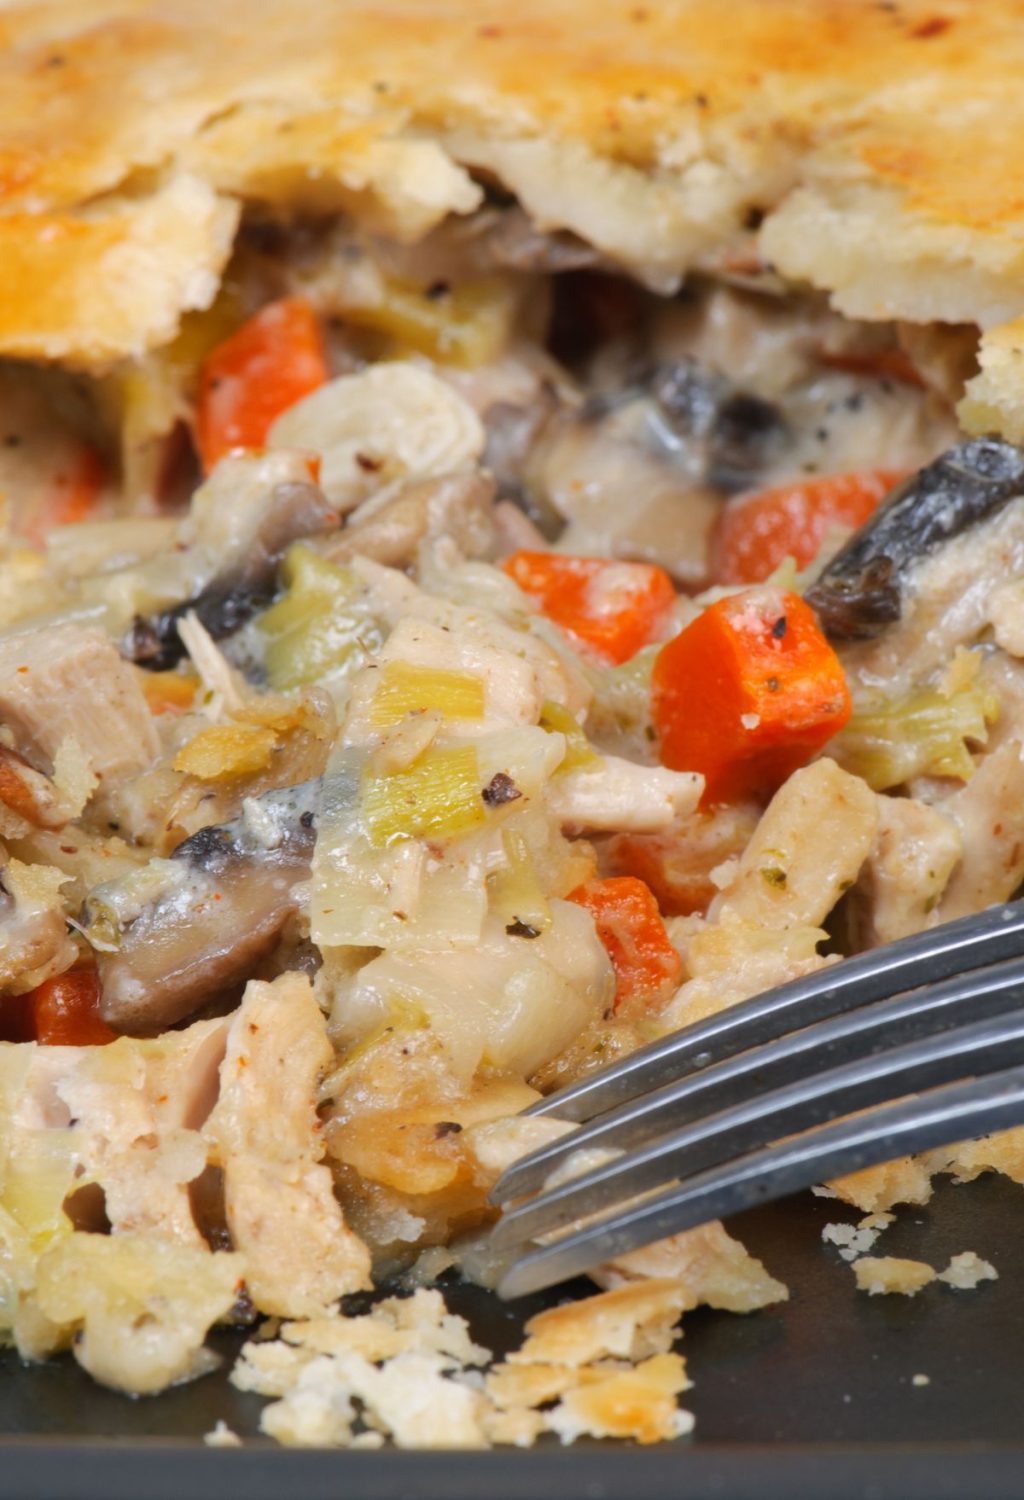 A chicken pot pie with vegetables and a fork.